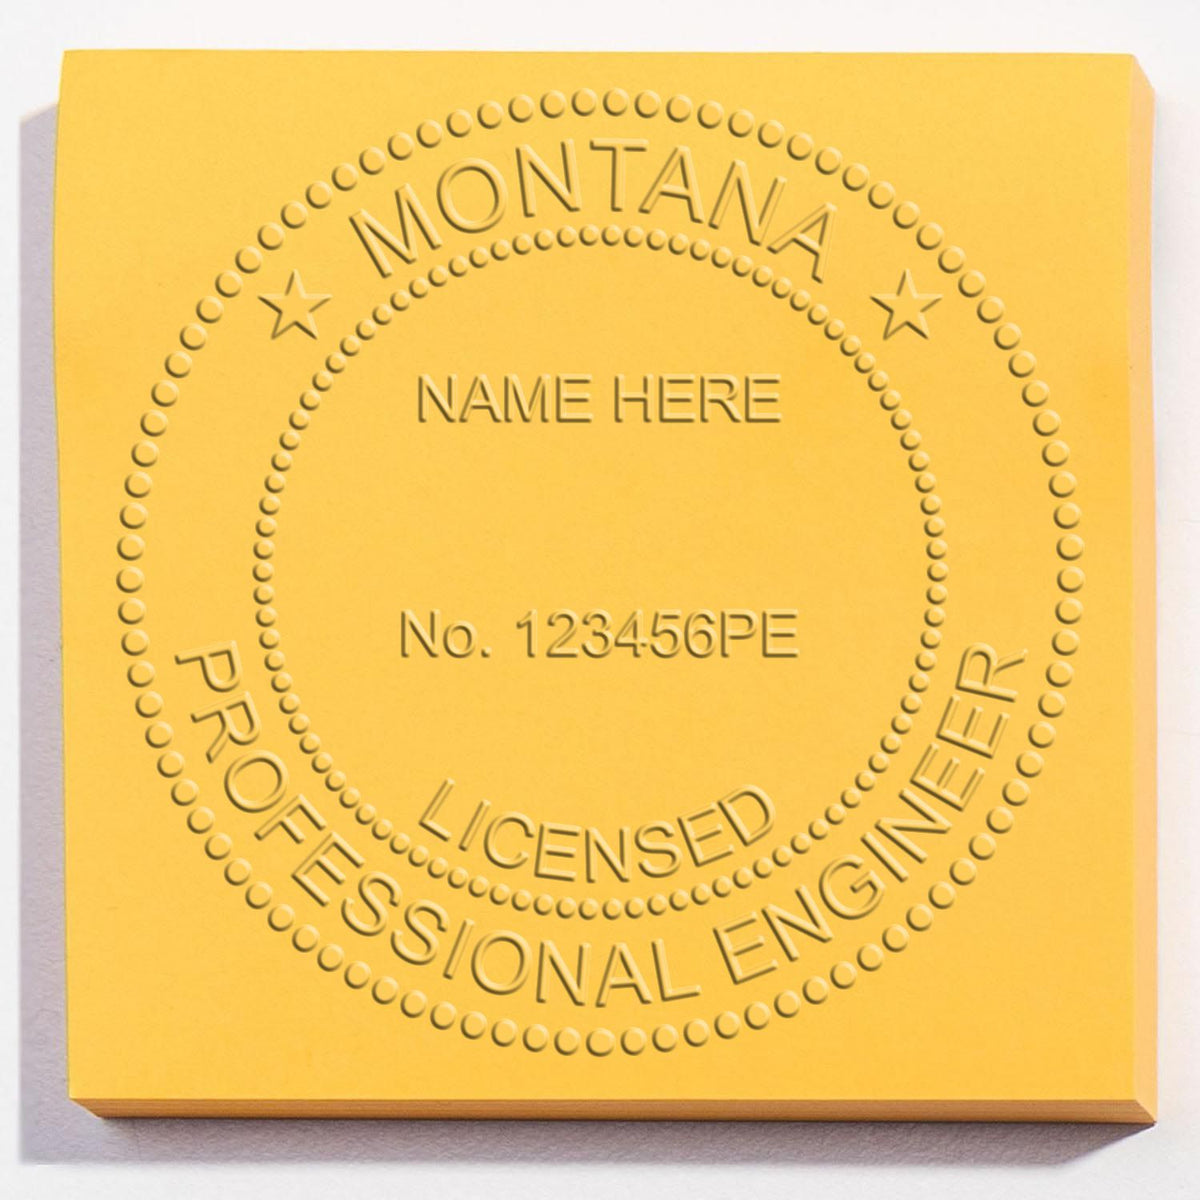 A photograph of the Hybrid Montana Engineer Seal stamp impression reveals a vivid, professional image of the on paper.